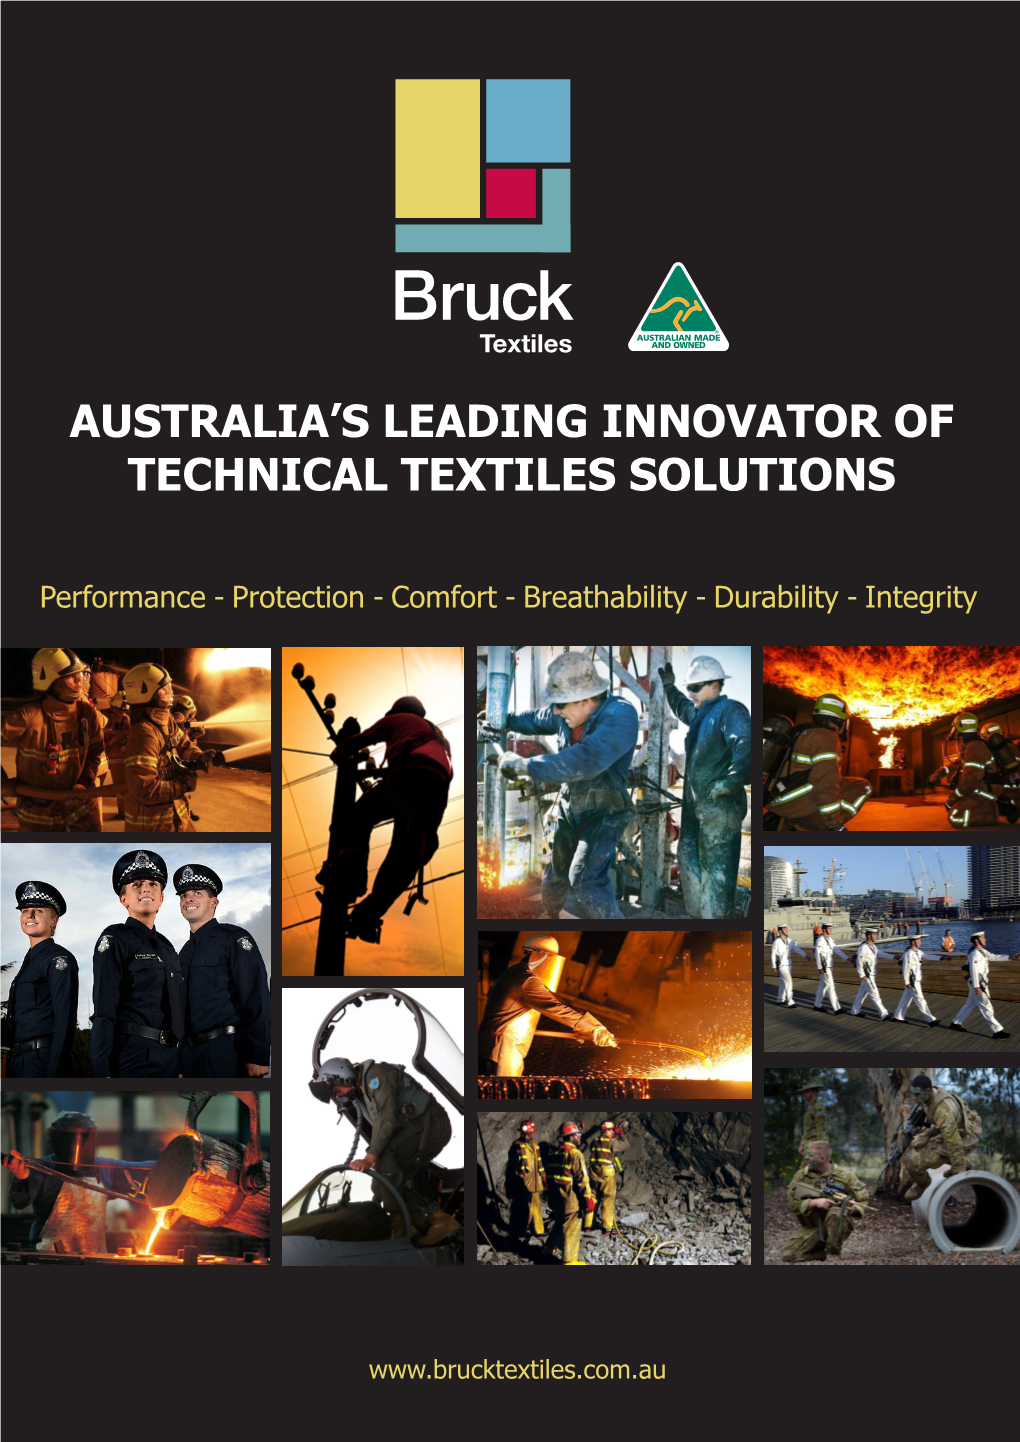 BRUCK TEXTILES Privately Owned Australian Company That Has Been Developing Quality Fabrics Since 1946